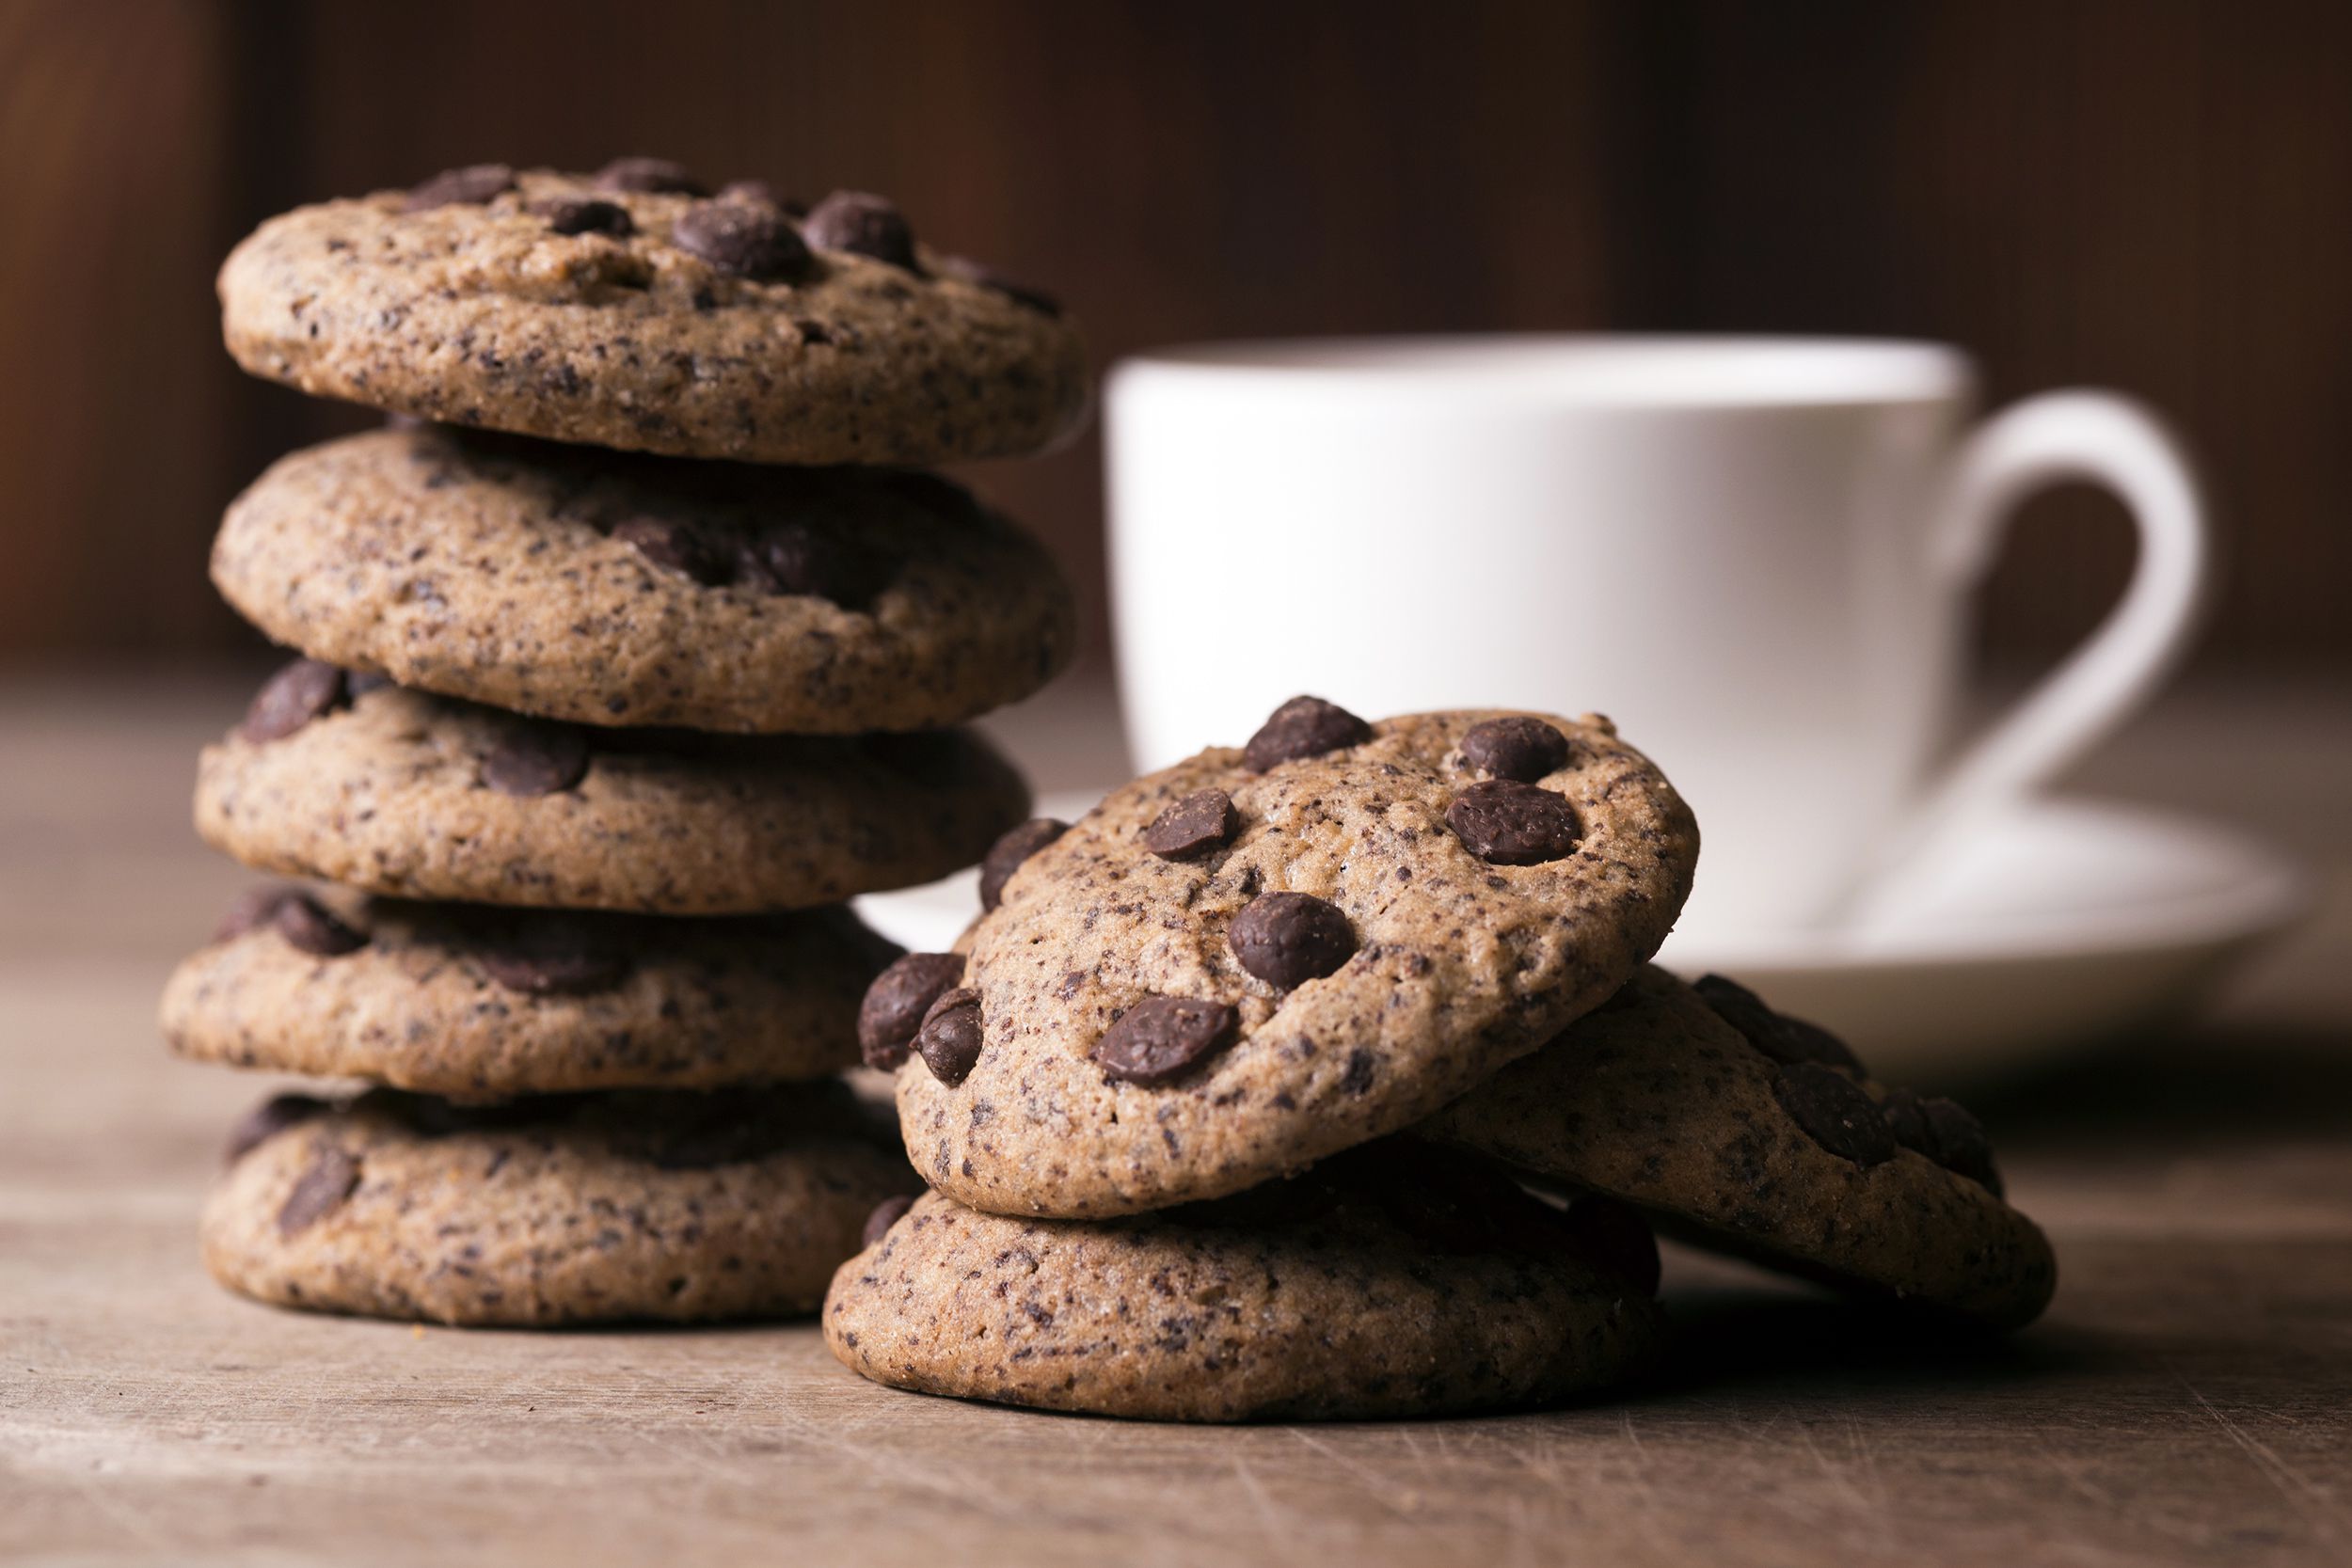 <p>Coffee and chocolate combine in each bite of these irresistible cookies, a "grown-up" version of the classic. The addition of espresso powder isn't overpowering; it provides a subtle depth of flavor that supports the chocolate.</p><p><b>Recipe:</b> <a href="https://celebratingsweets.com/espresso-chocolate-chip-cookies/">Celebrating Sweets</a></p><p><a href="https://blog.cheapism.com/best-instant-coffee-drinks/">A Surprising Ingredient Makes These Desserts Irresistible</a></p>